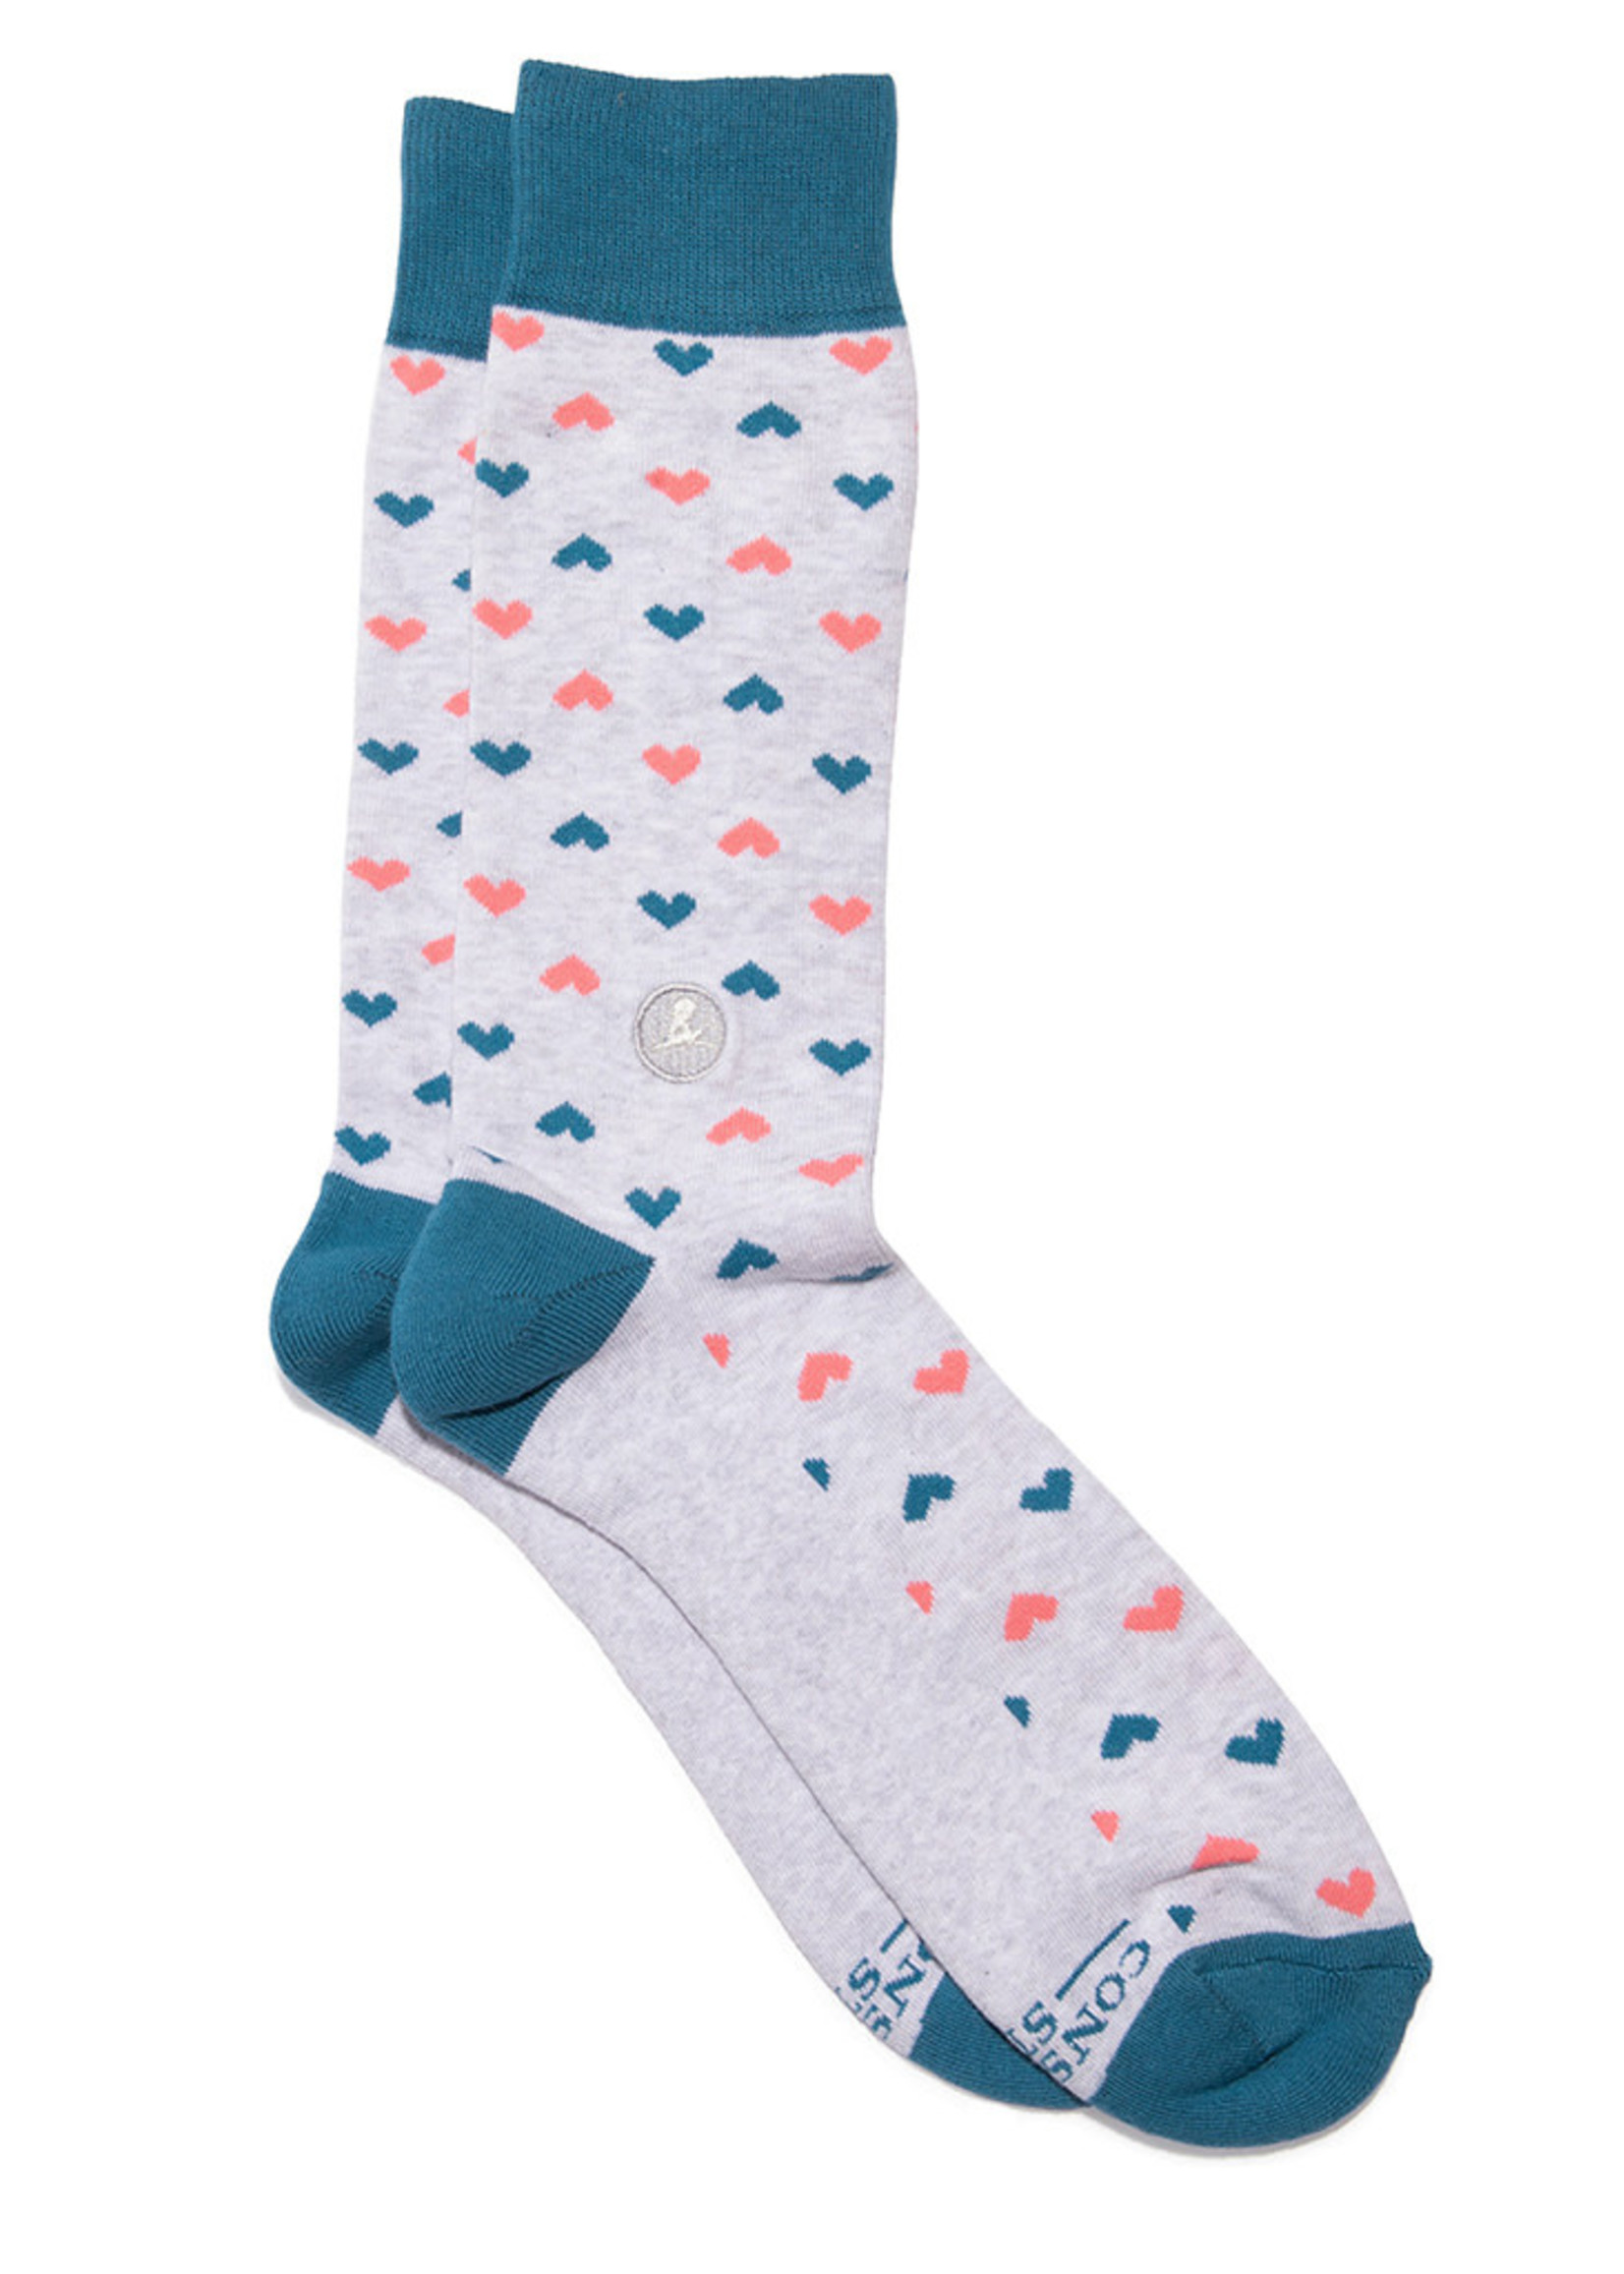 Conscious Step Women's Socks That Find a Cure